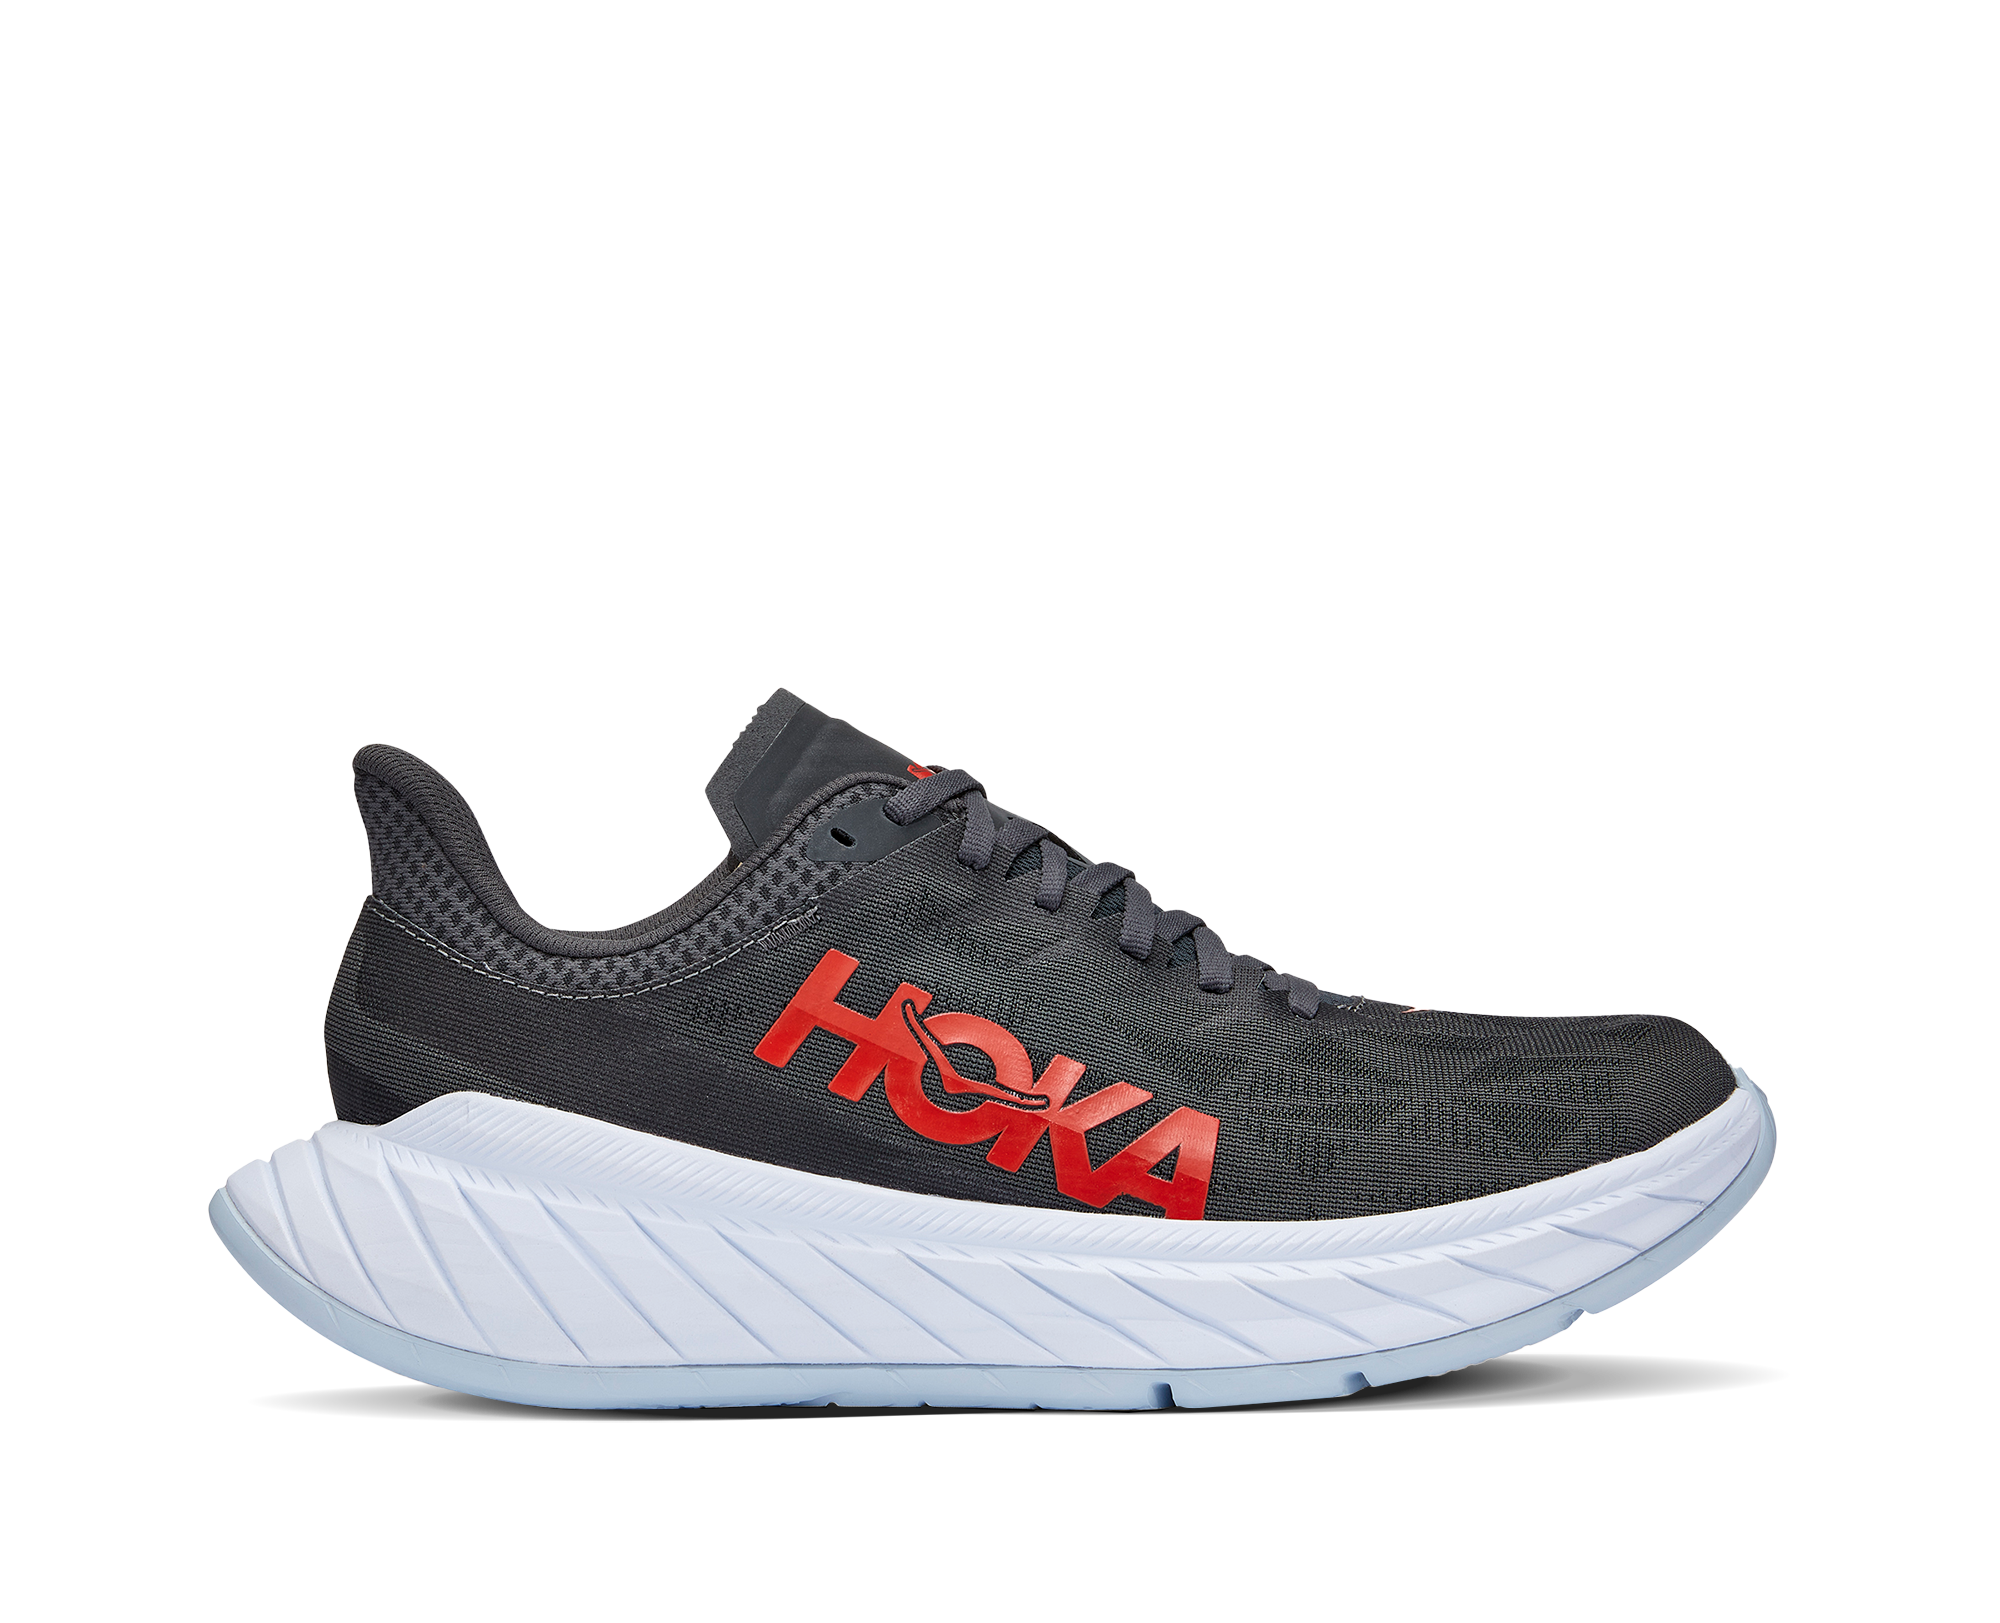 Road Trail Run: Hoka ONE ONE Carbon X 2 Multi Tester Review